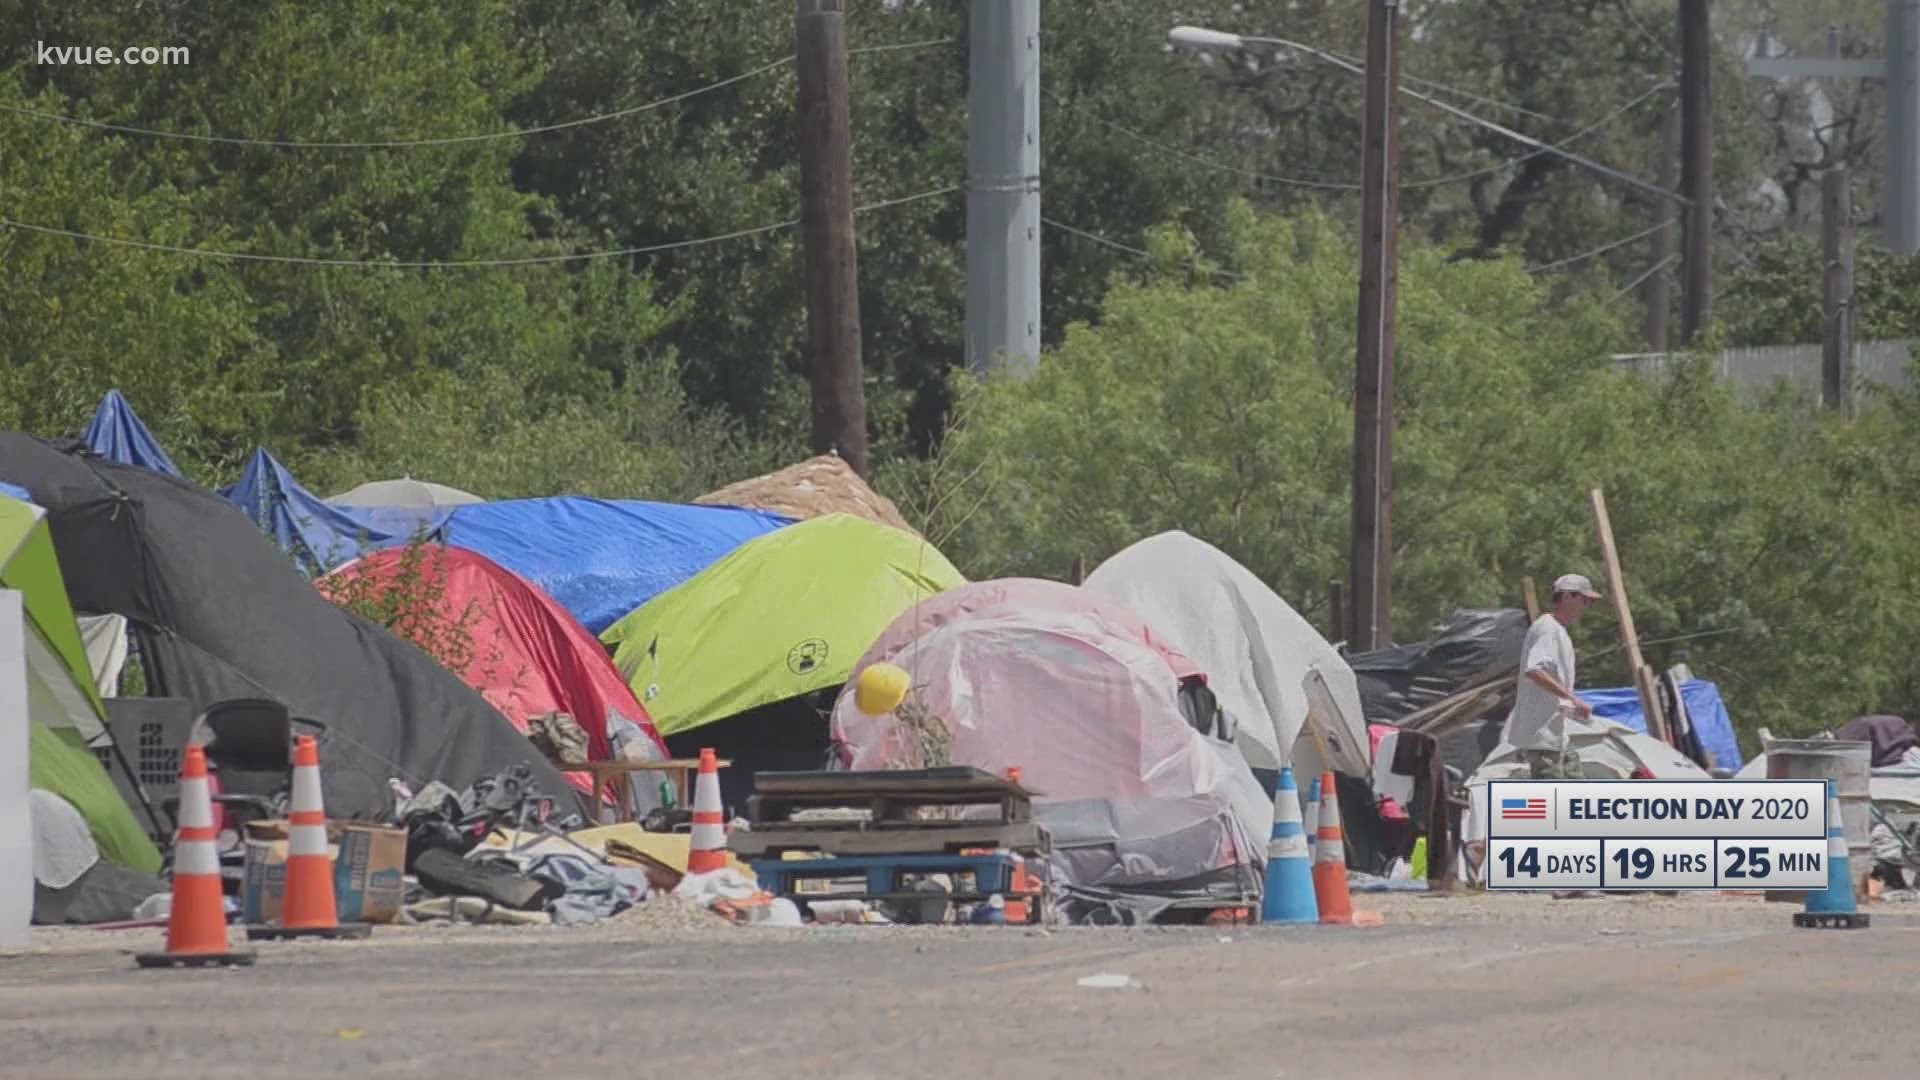 More than a year after Gov. Greg Abbott funded a state-sanctioned homeless encampment off Highway 183, a nonprofit is bringing in additional support.